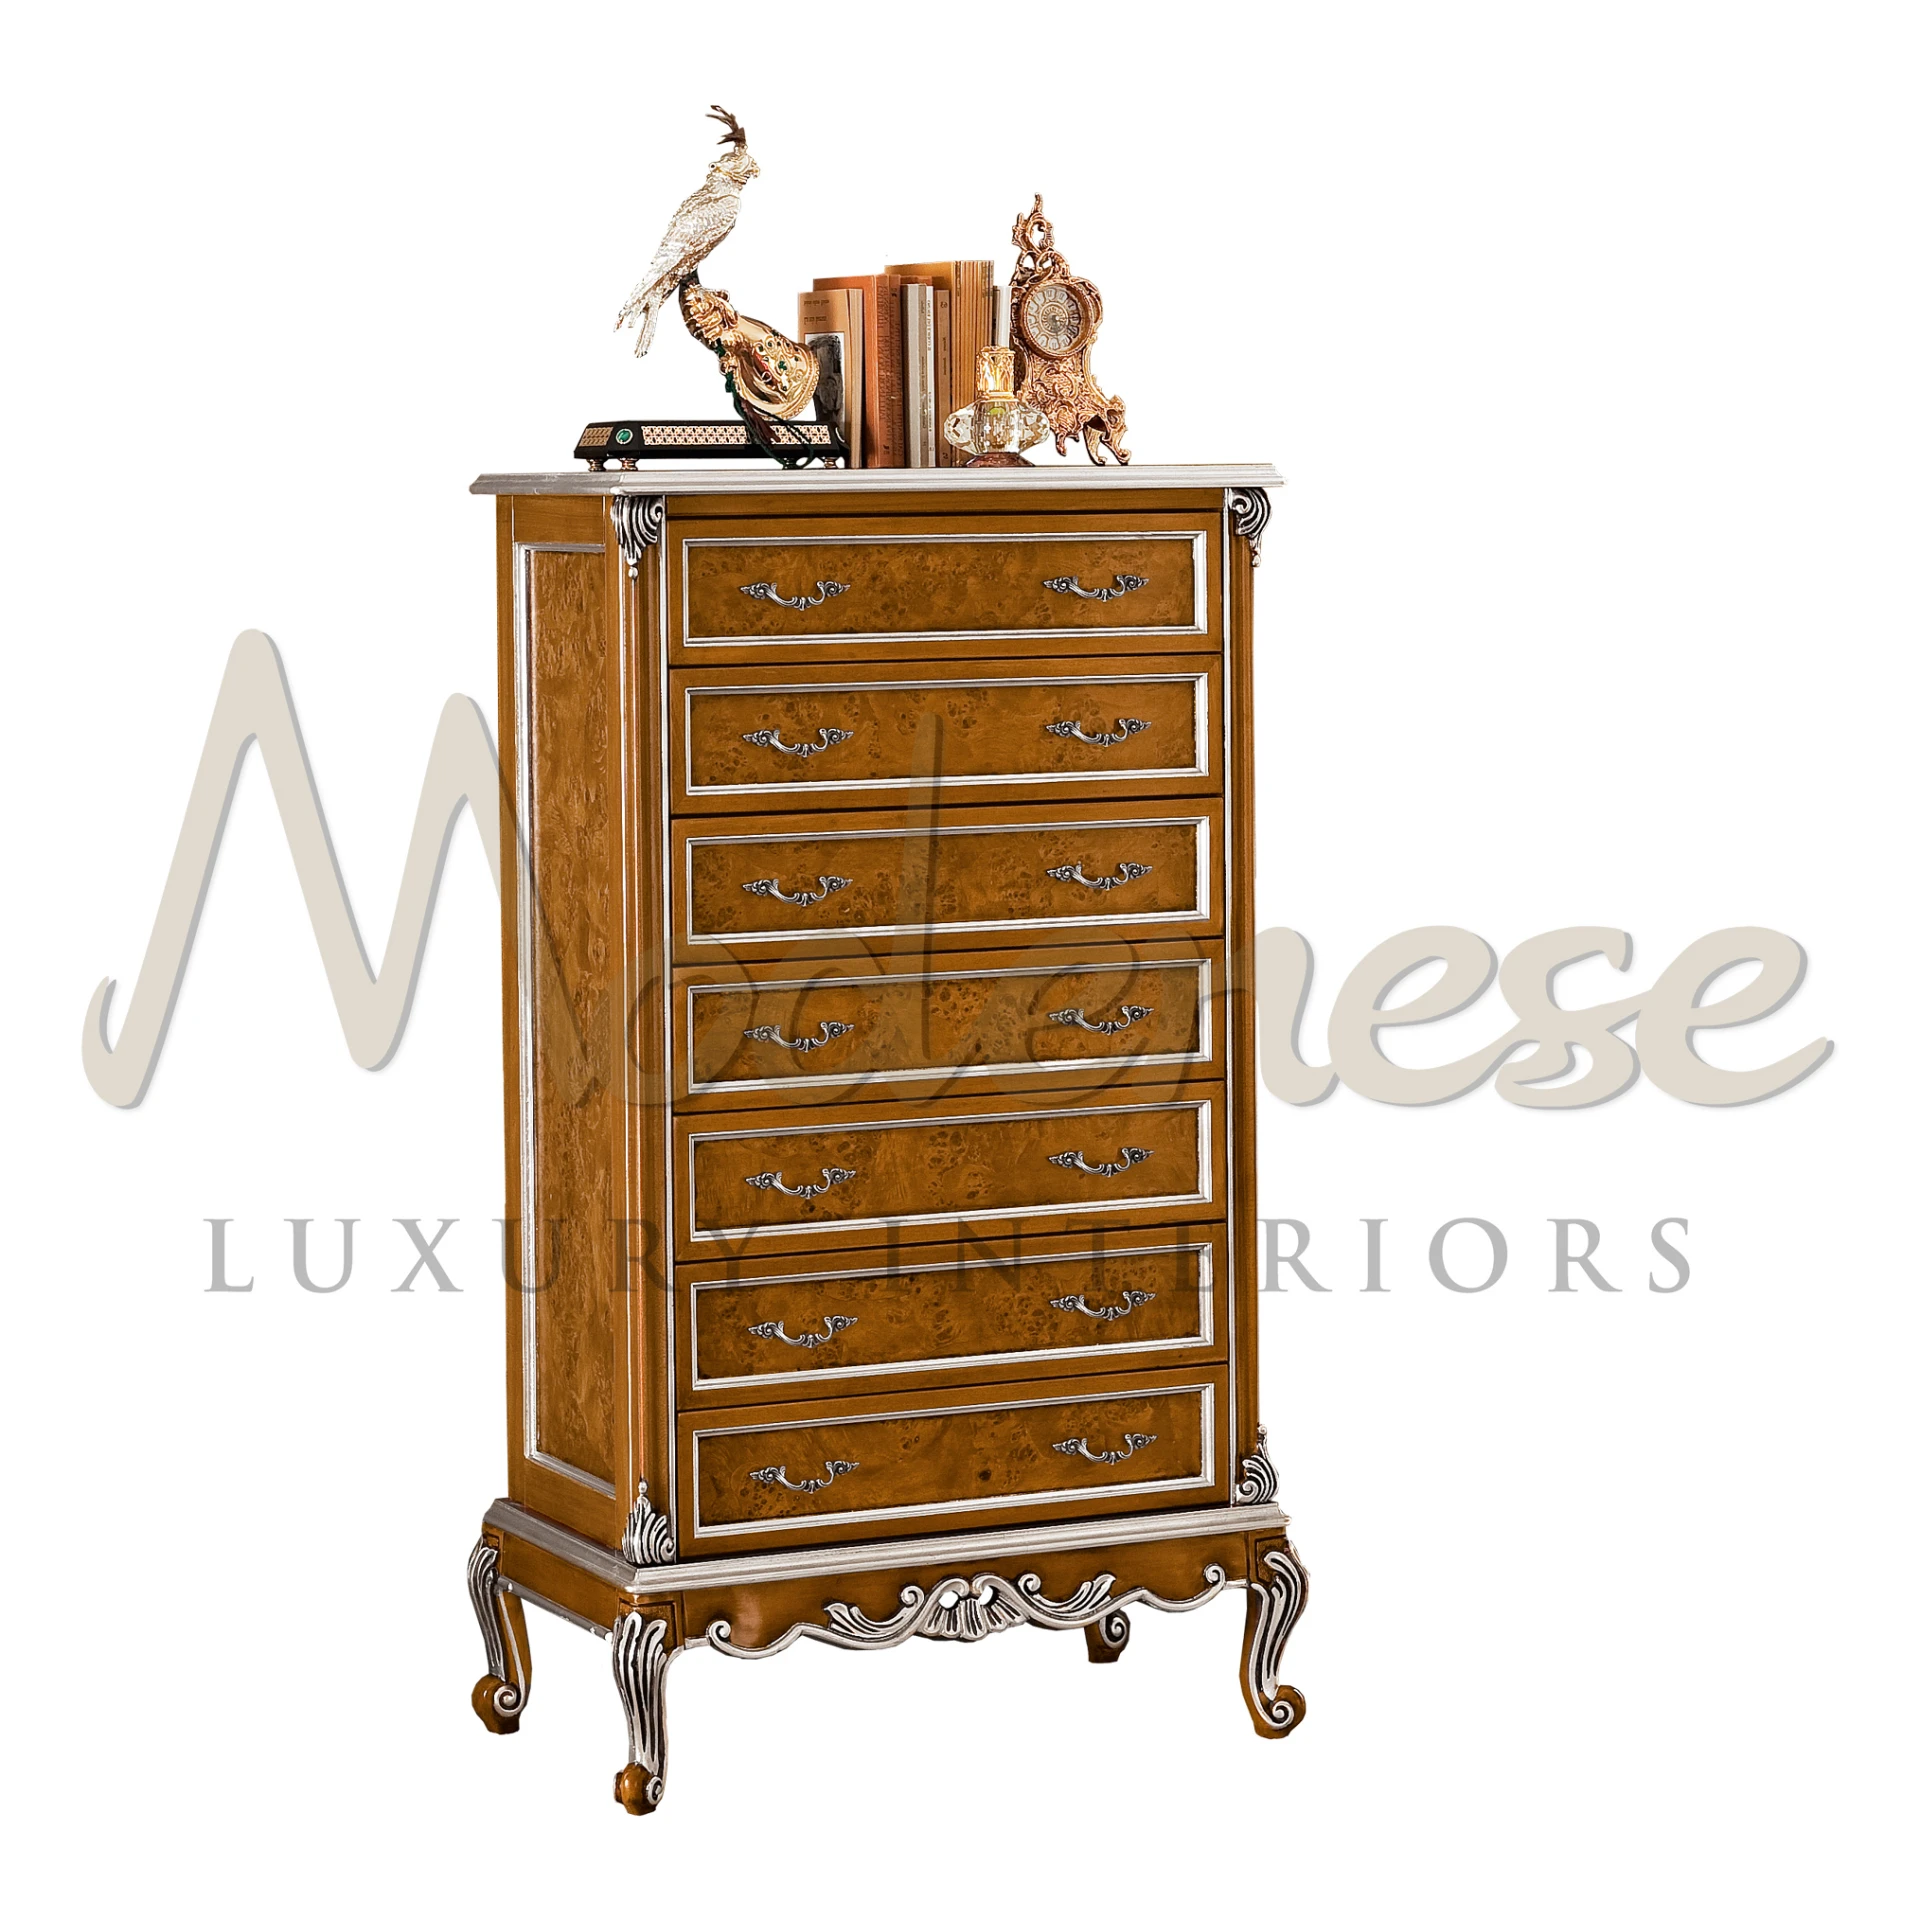 Elegant tall burlwood chest of drawers with decorative silver handles and accents by Modenese Furniture                                                      